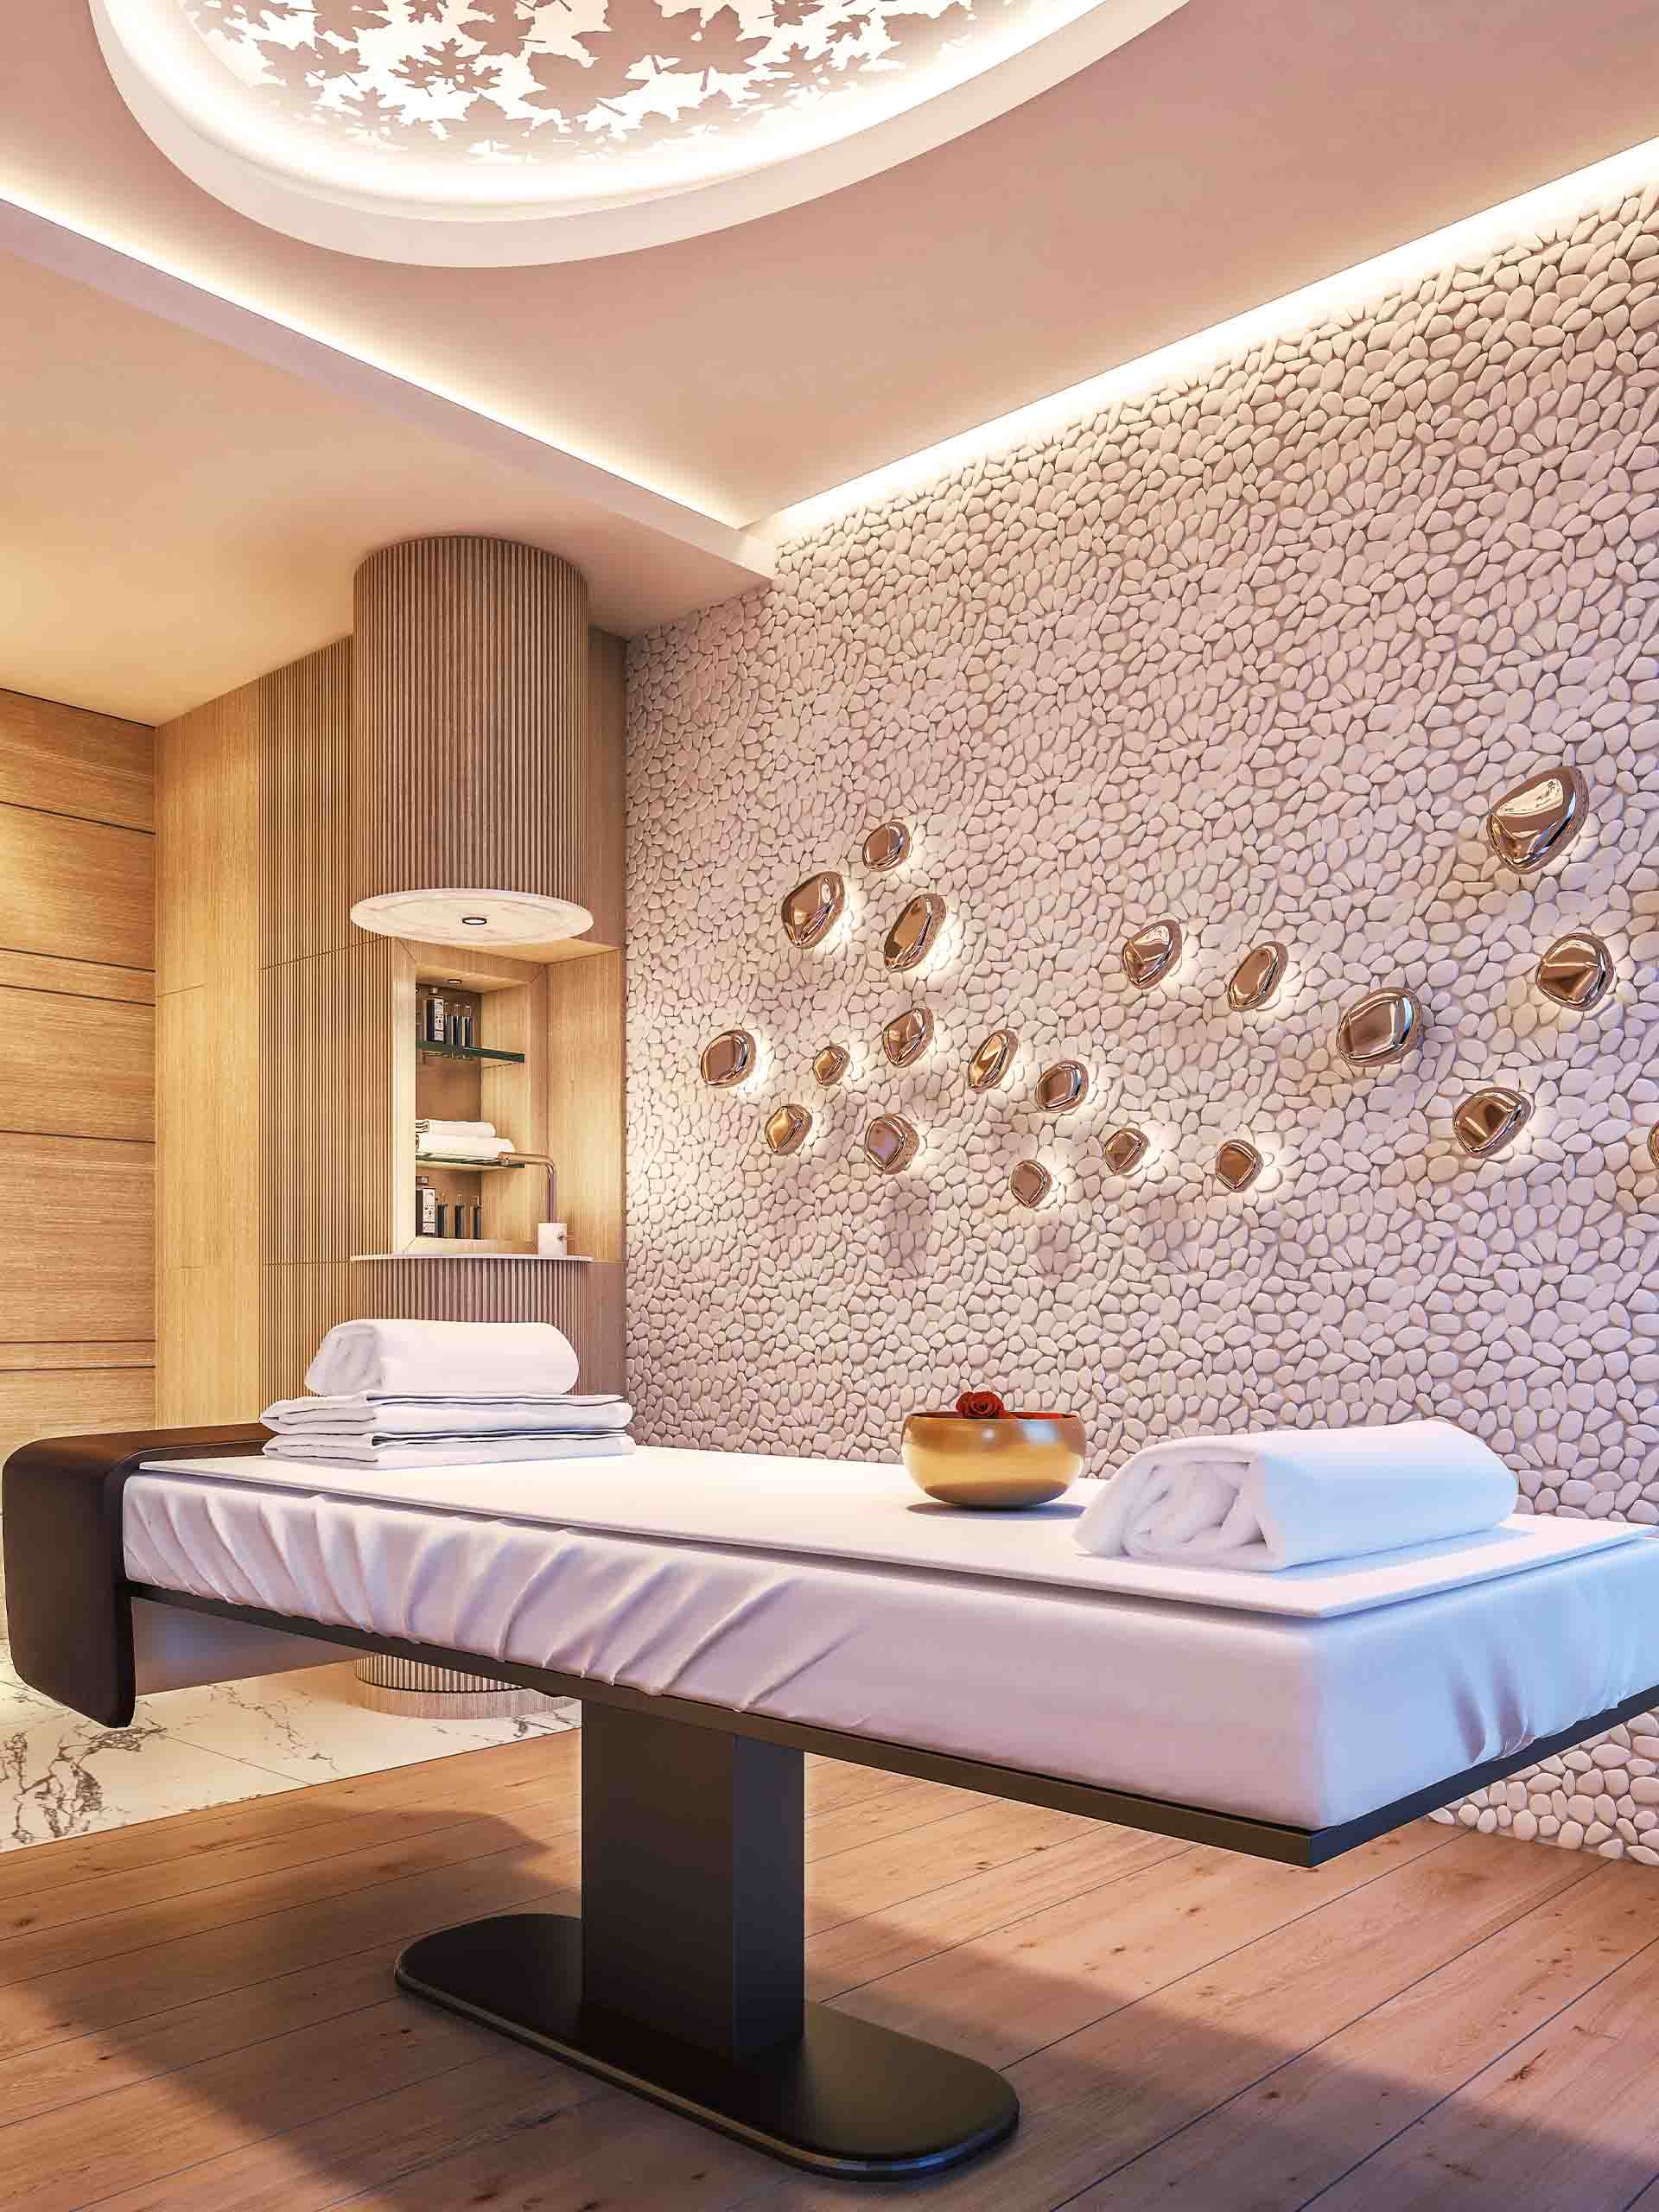 Swiss Serenity: Geneva Massage Room - Buy the calm, build your sanctuary. Explore designs inspired by Geneva's sophistication, where style meets affordability.